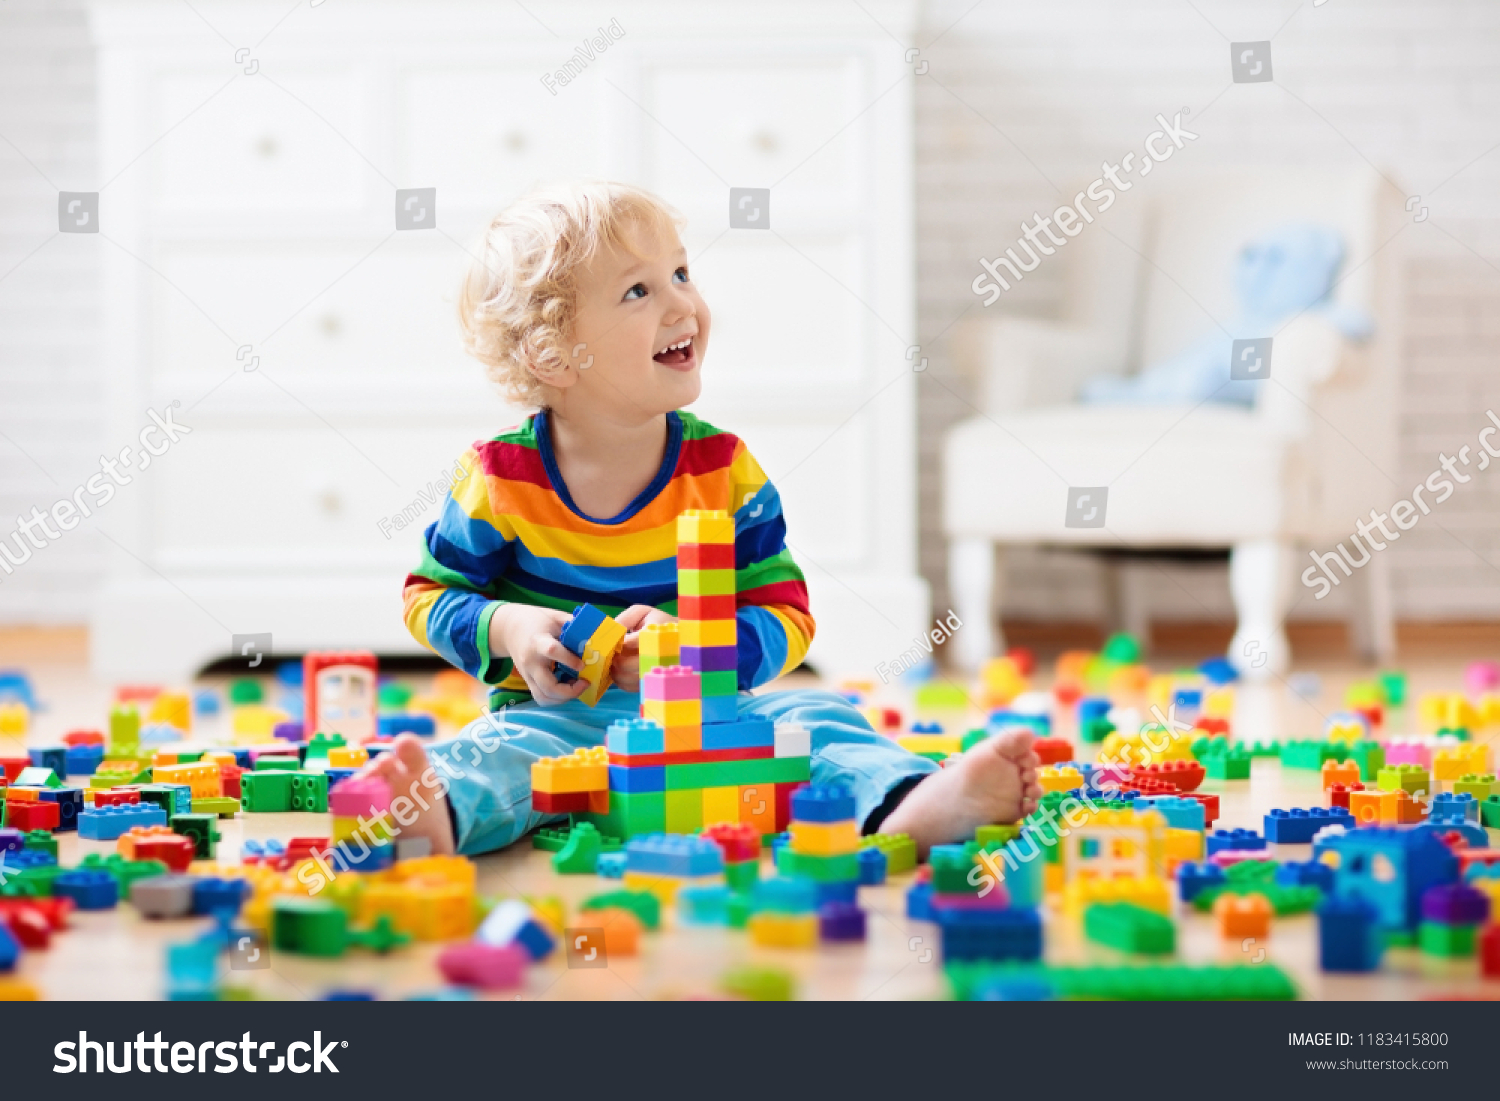 Child playing with colorful toy blocks. Little boy building tower at home or day care. Educational toys for young children. Construction block for baby or toddler kid. Mess in kindergarten play room. #1183415800